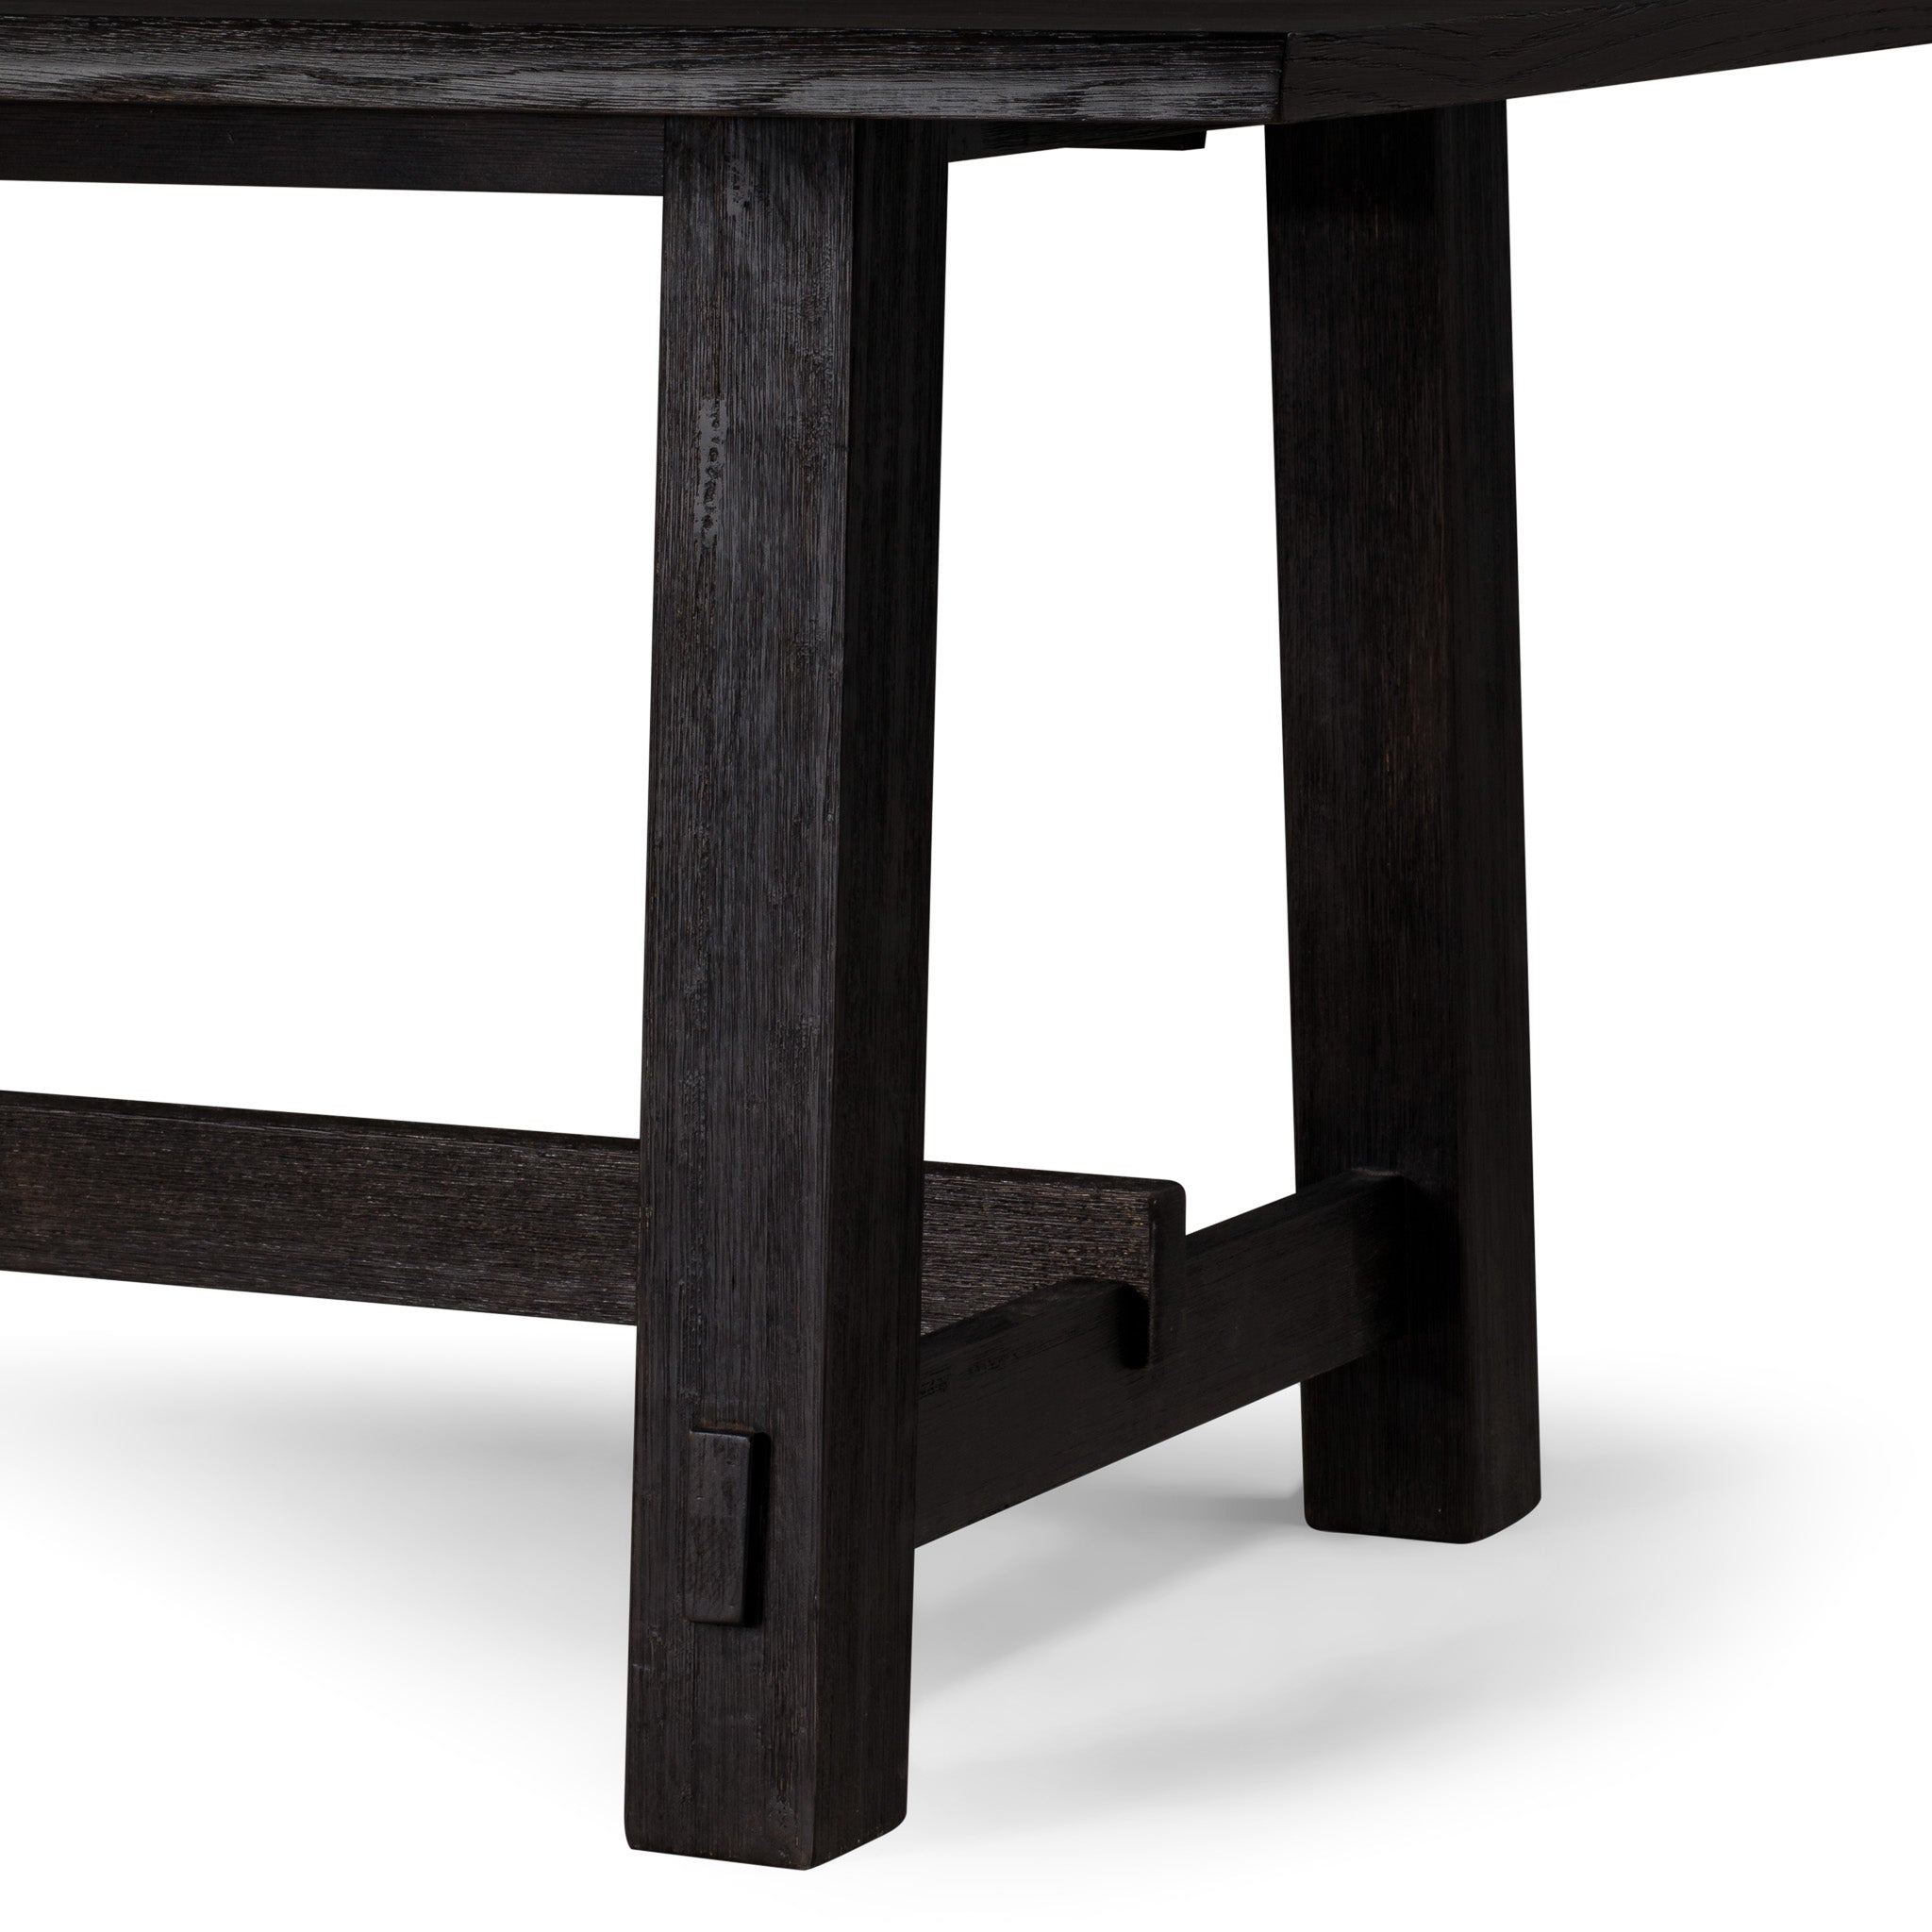 Yves Organic Rectangular Wooden Dining Table in Weathered Black Finish in Dining Furniture by Maven Lane